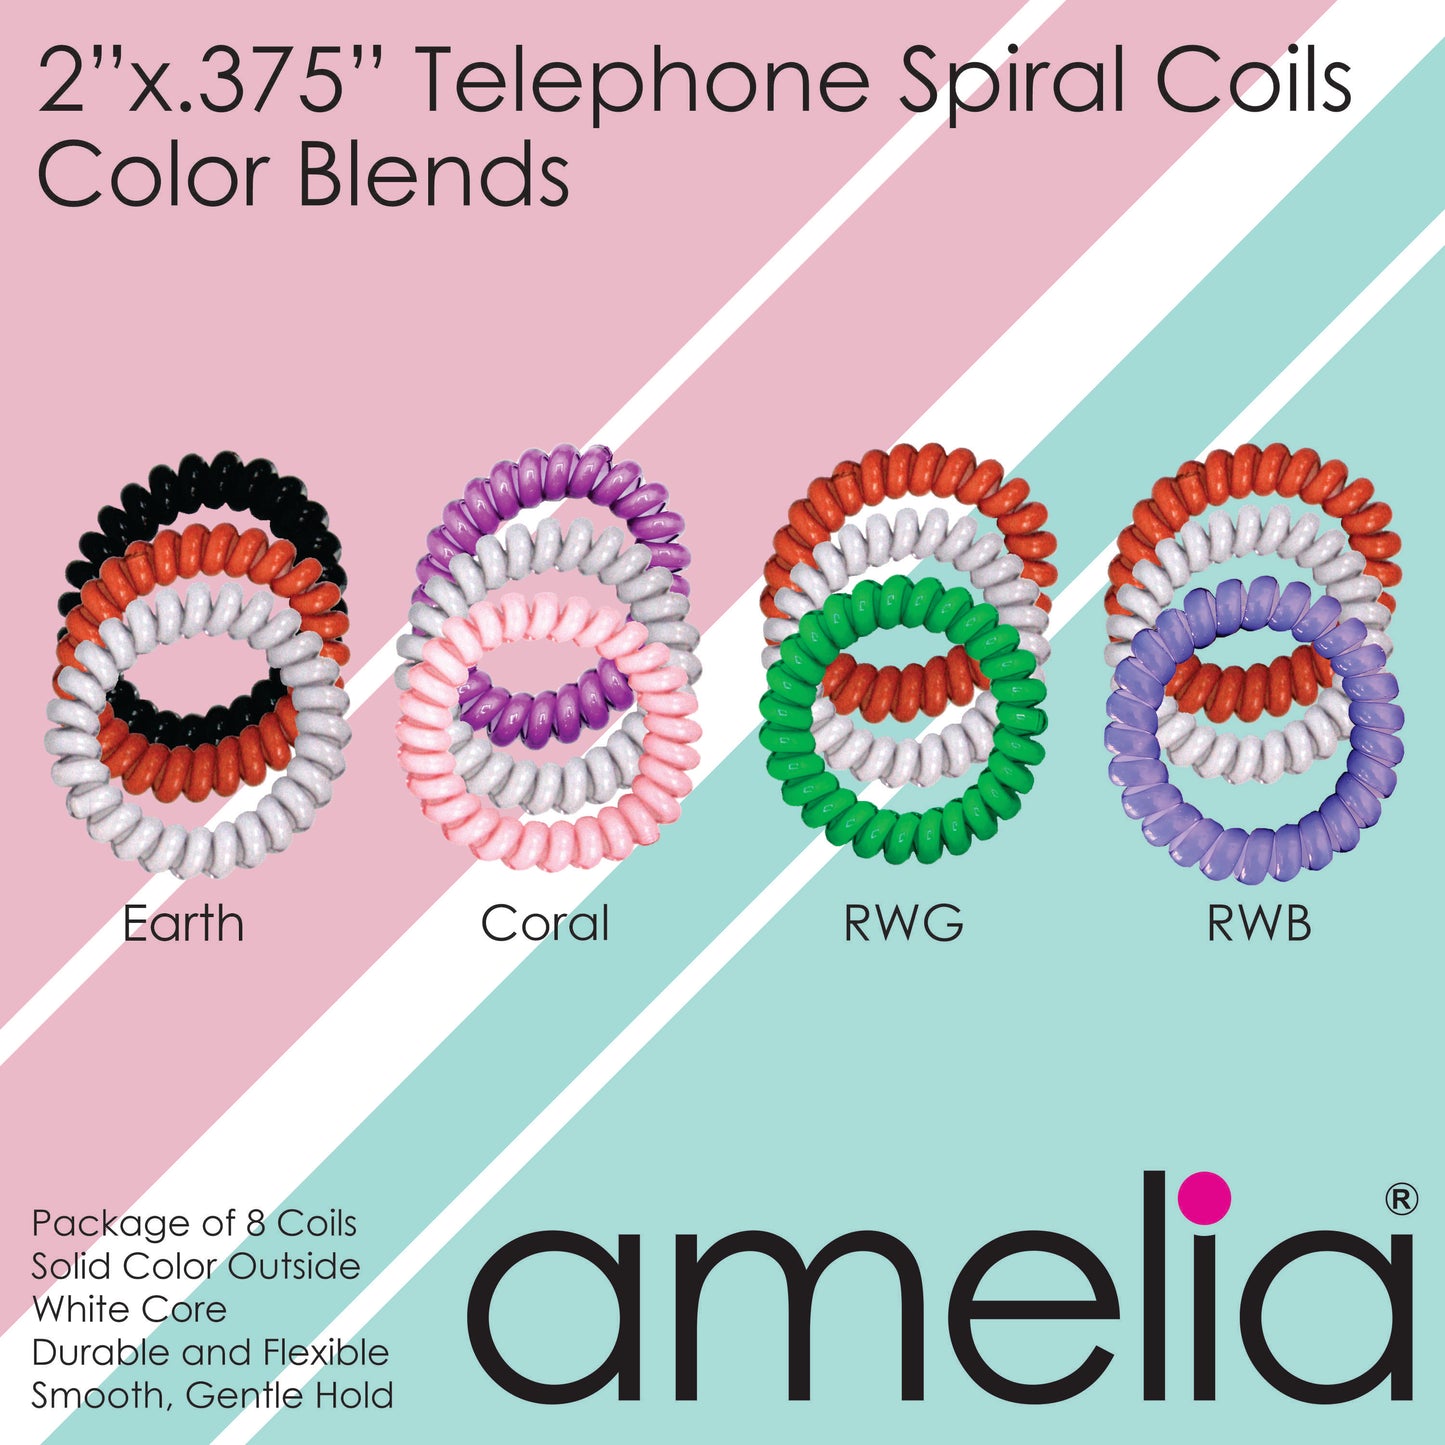 Amelia Beauty Products 8 Medium Elastic Hair Coils, 2.0in Diameter Thick Spiral Hair Ties, Gentle on Hair, Strong Hold and Minimizes Dents and Creases, Magenta